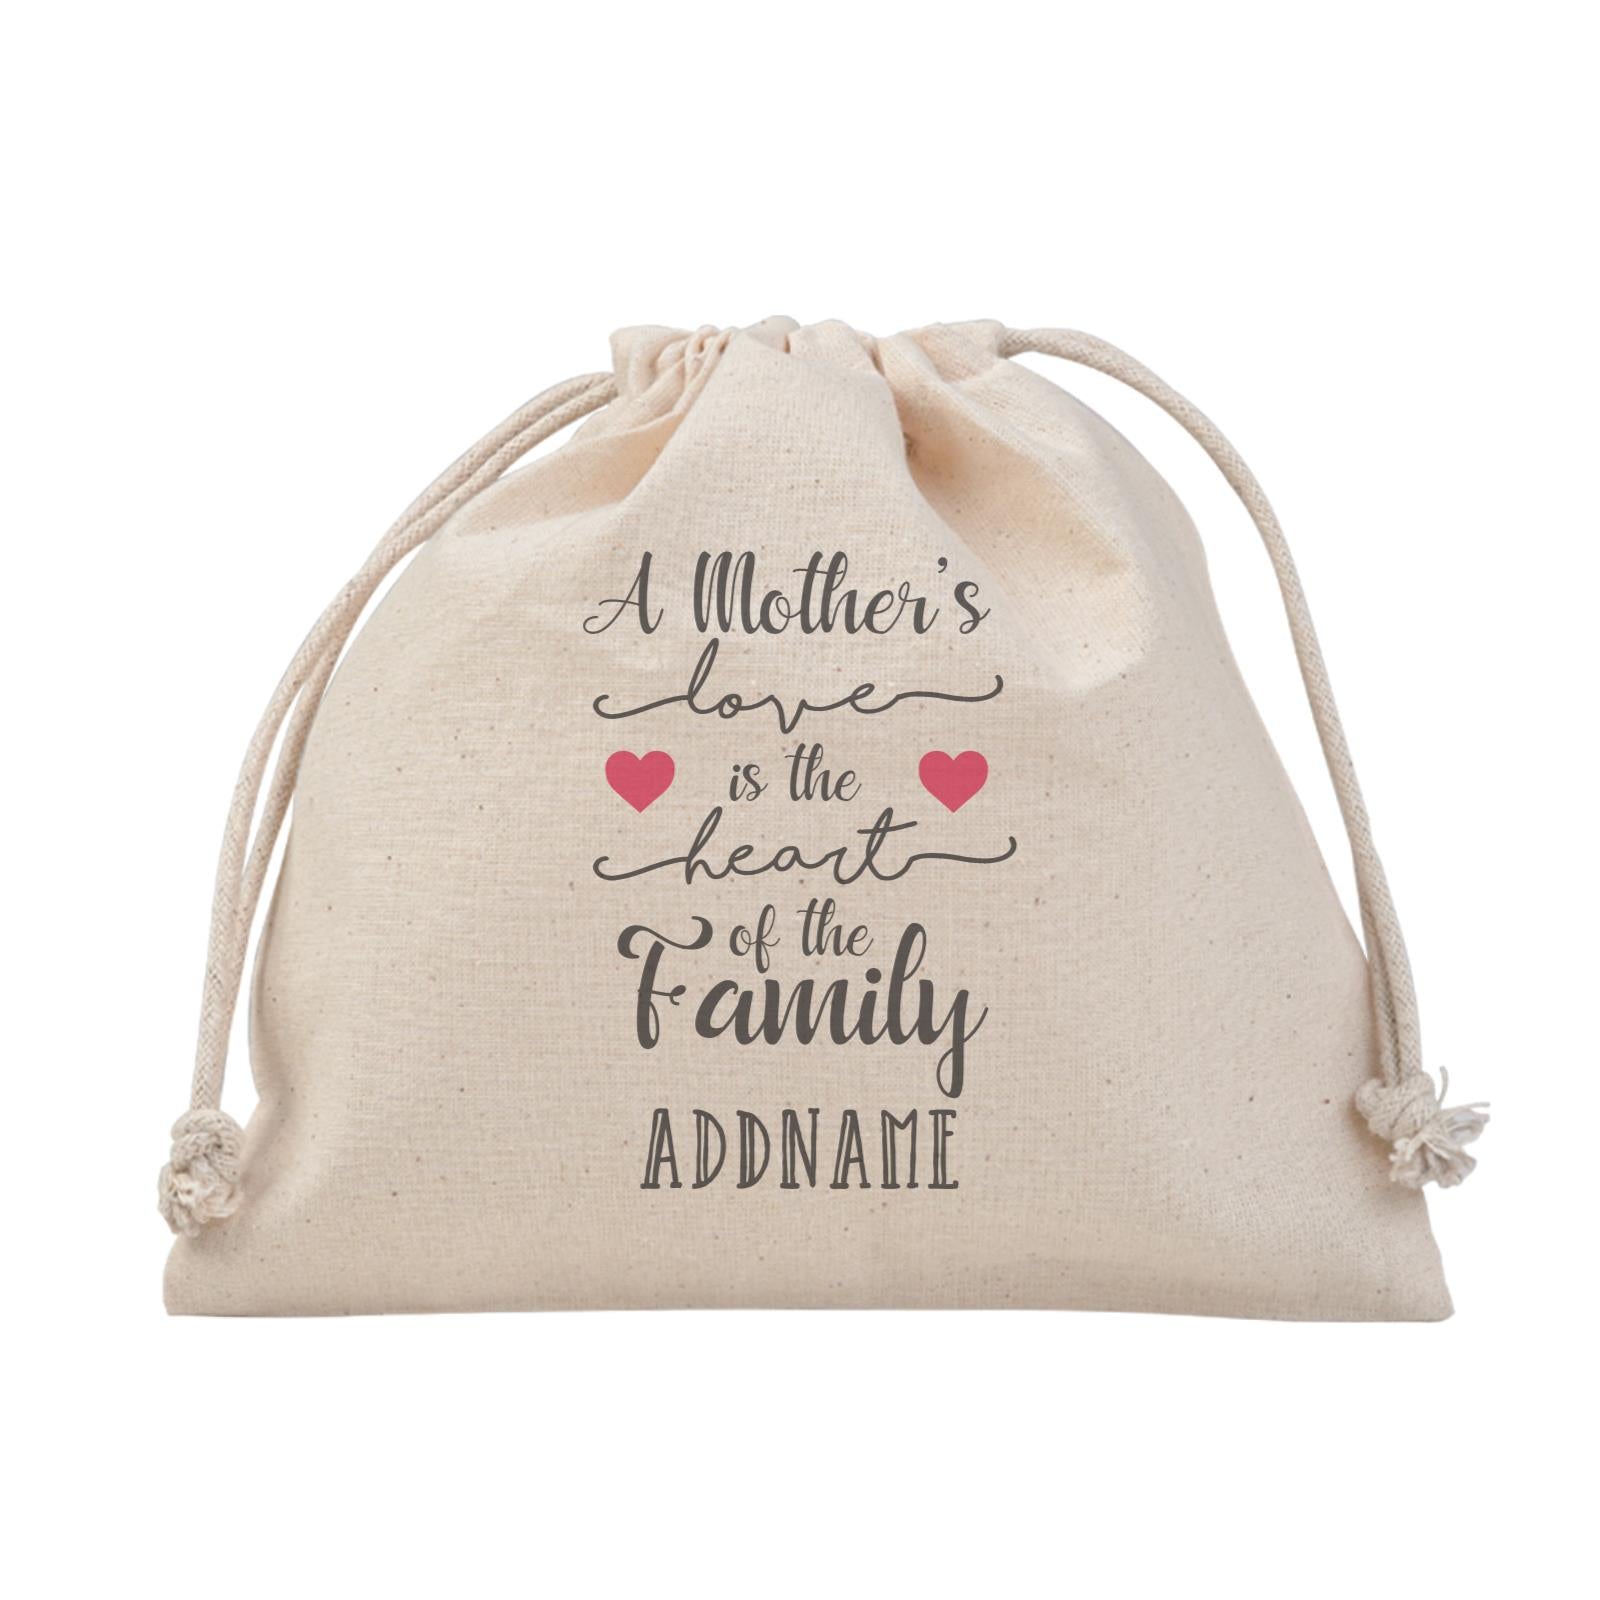 [MOTHER'S DAY 2021] A Mother's Love Is The Heart of the Family Satchel